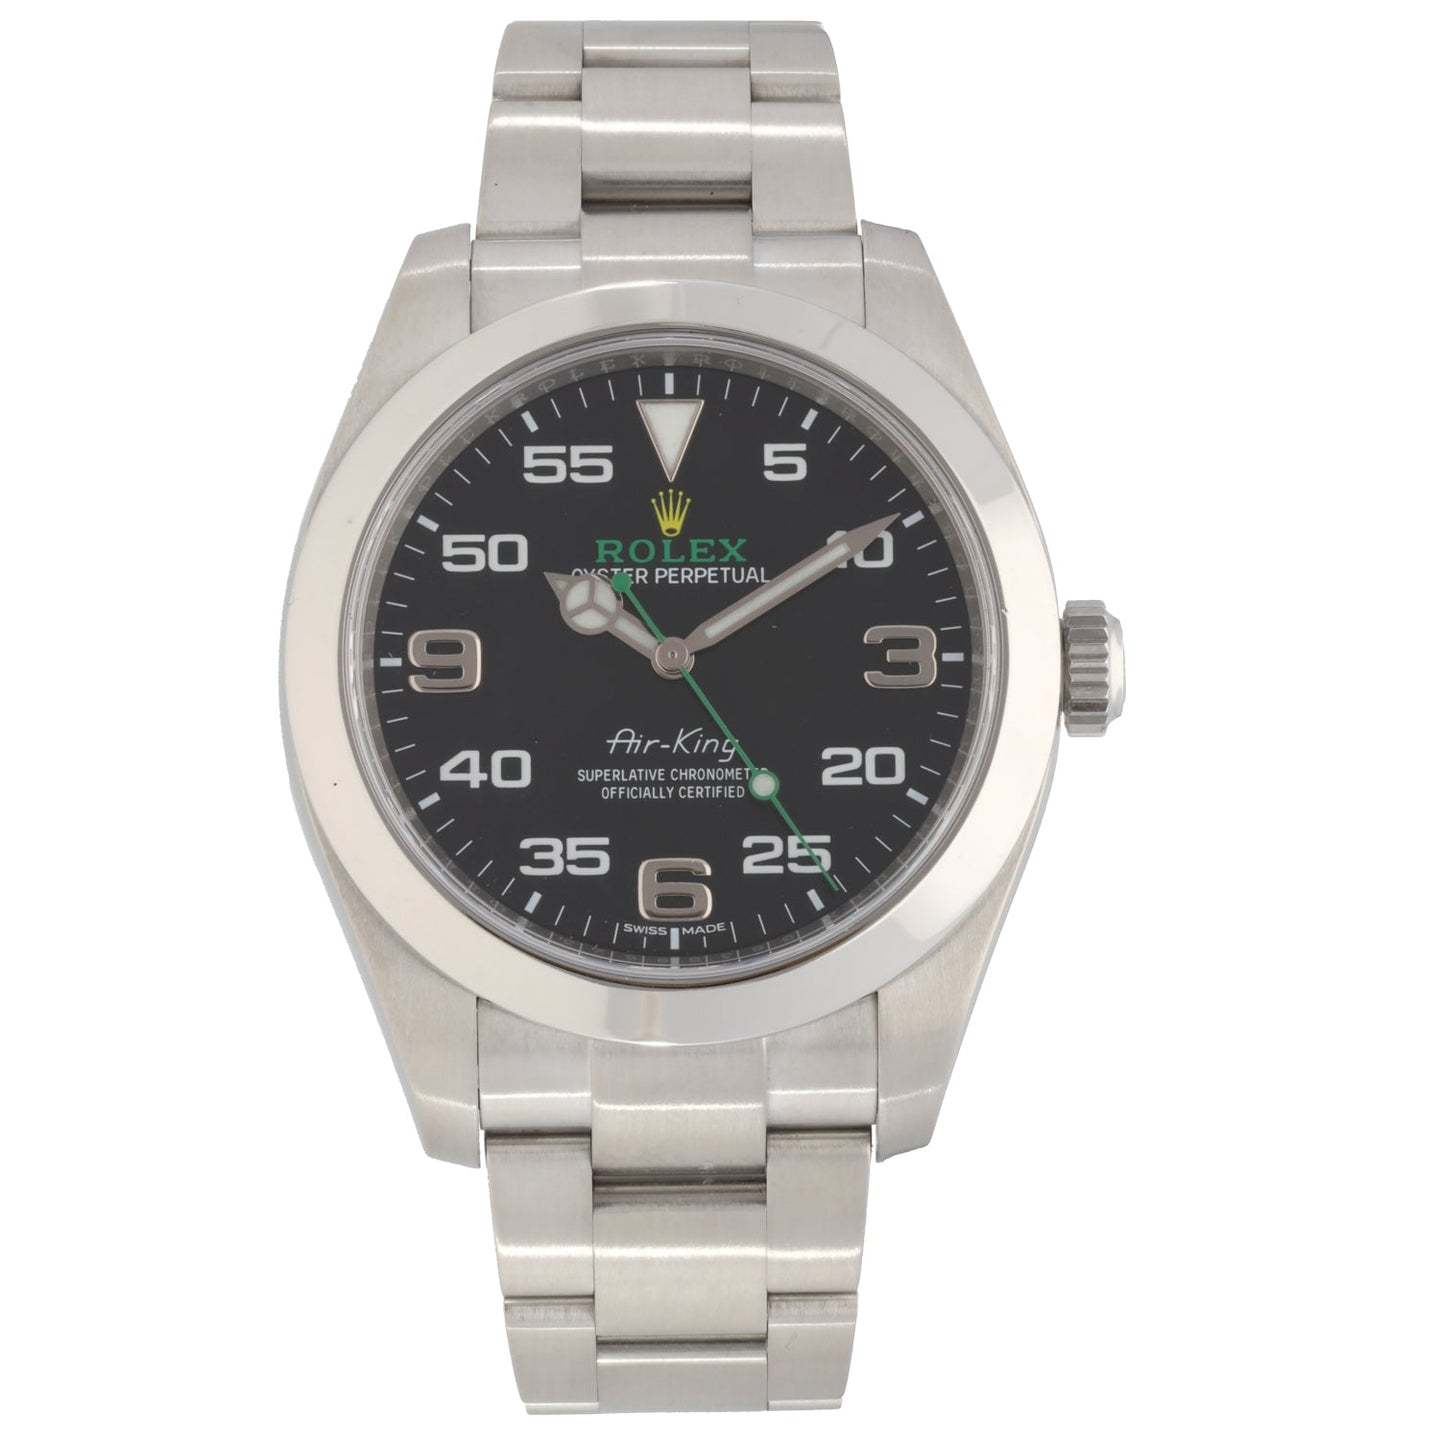 Rolex Air King 116900 40mm Stainless Steel Watch